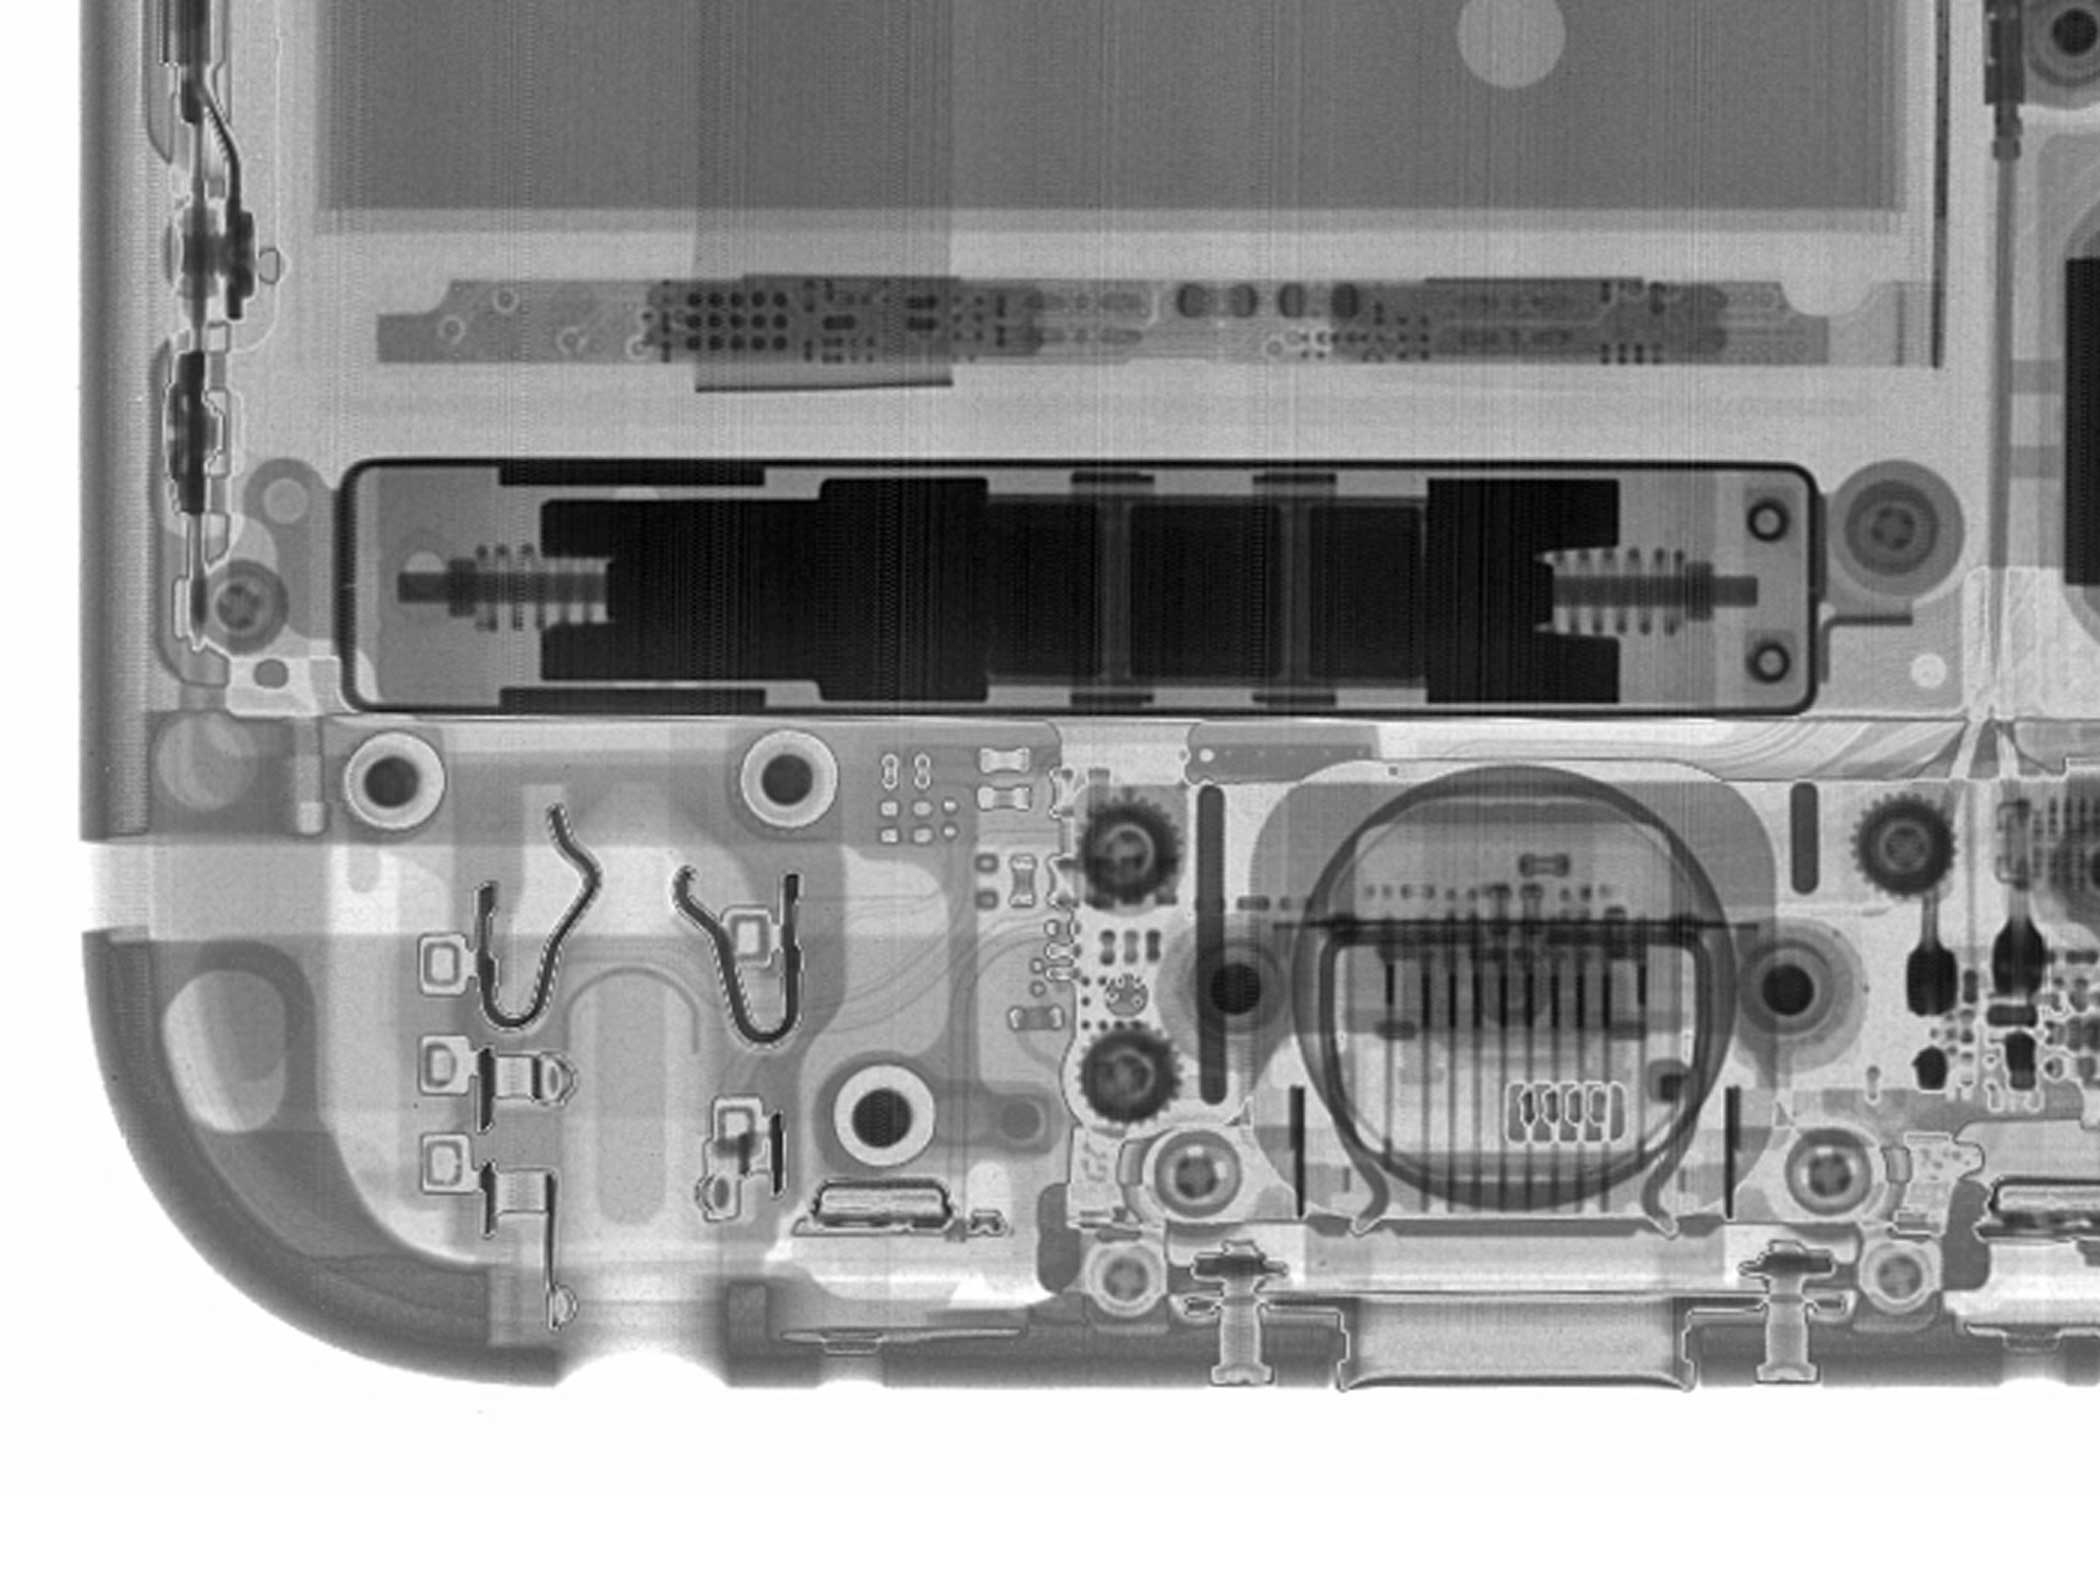 An x-ray reveals the Taptic engine (in dark black) responsible for 3D Touch.